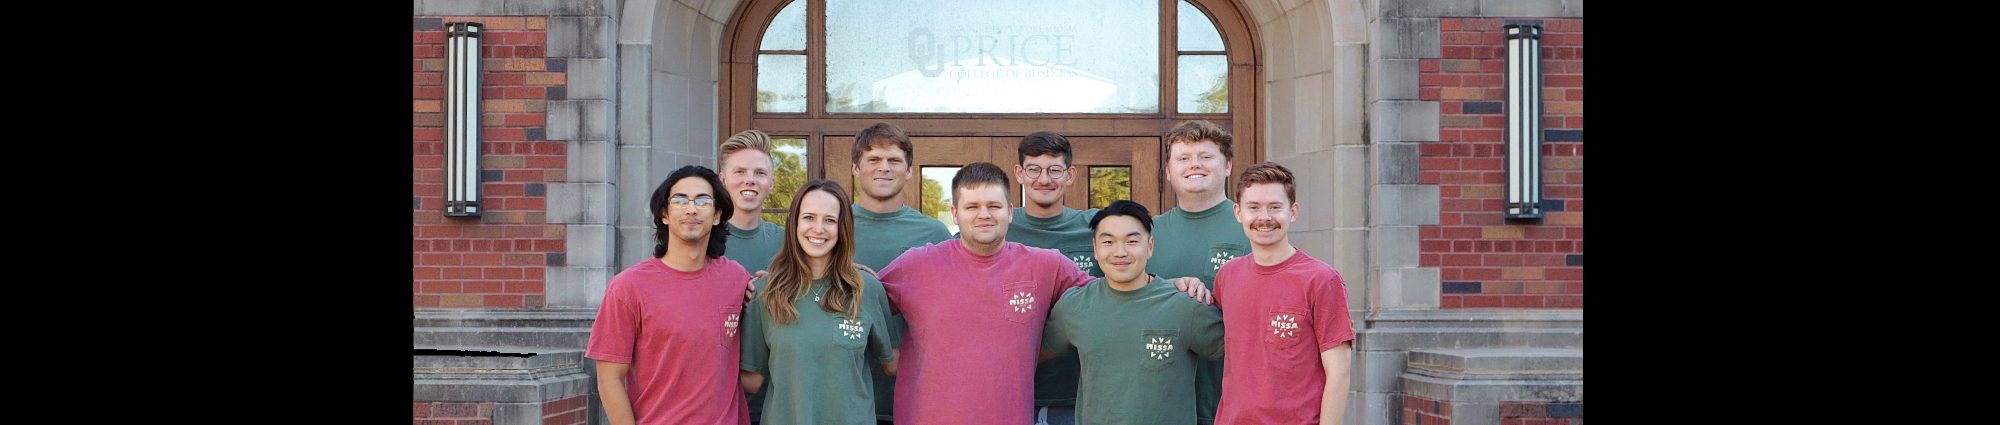 MISSA Officers - Back row, left to right are Matthew Brinkmeyer - Vice President of Administration, Frederic Daughtrey - Faculty Advisor, Connor Burns – President, Kaleb Colibart – Operations and Front Row Left to Right are Imran Ahmed – Communications,  Nicole Goral - Recruitment , Jefferey Nightengale – Treasurer, Kevin Chen - Vice President of Engagement, Hunter Moffet – Secretary